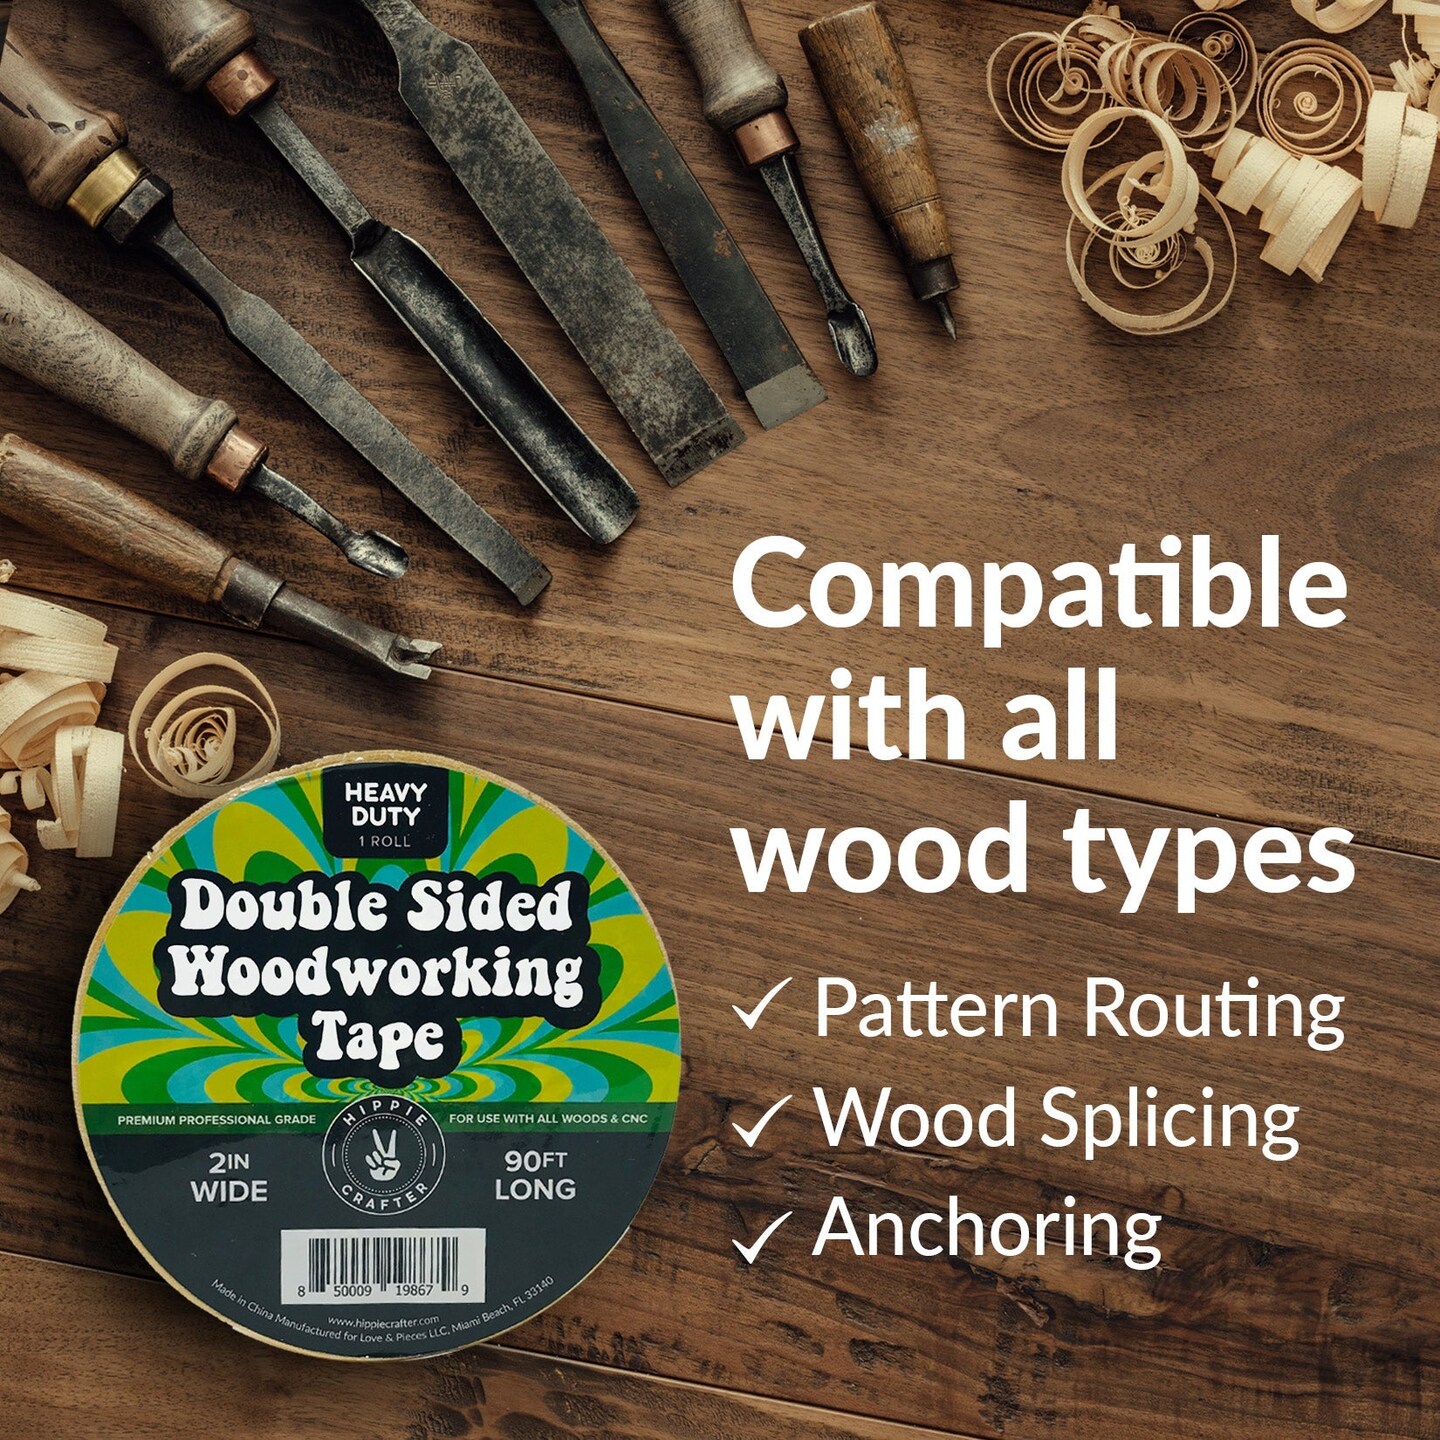 Wide Double Stick Tape Double Sided Woodworking Tape Double Sided 2&#x22; inch Wide Wood Tape for Woodworkers CNC Machines Routing Templates Strong Double Sided Tape Heavy Duty Sticky Tape 90 Feet